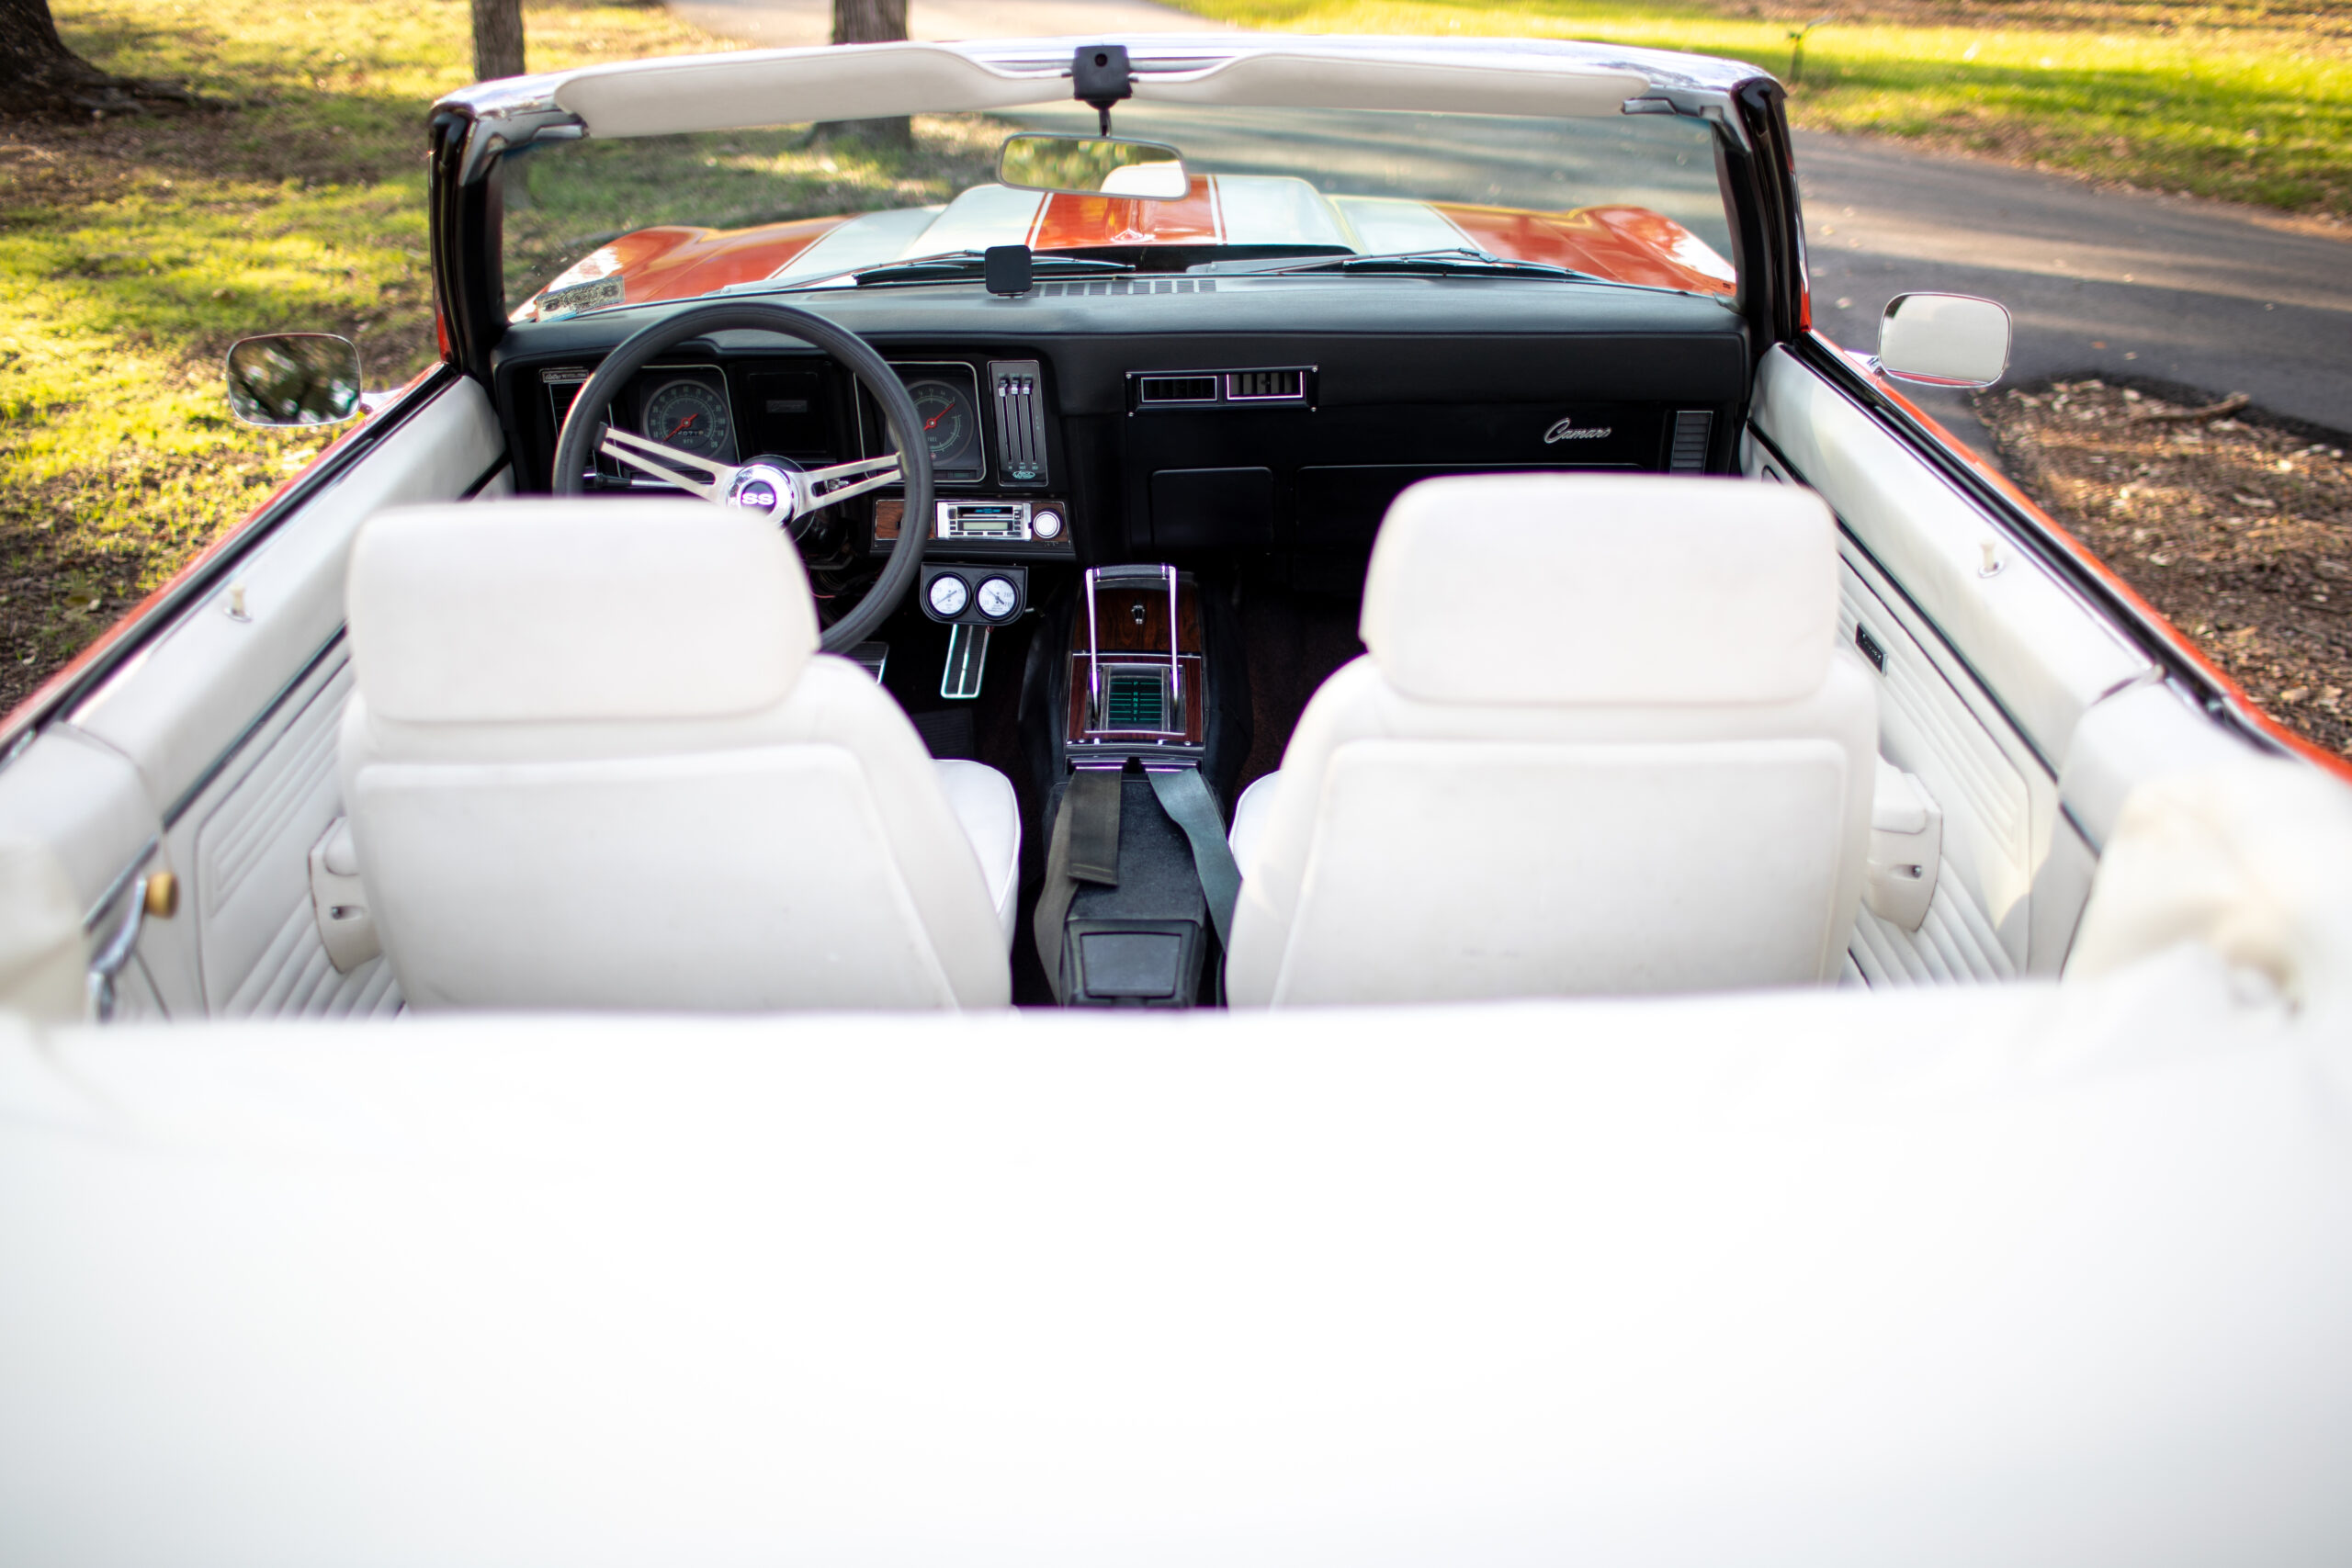 Interior view of a vintage convertible car with white seats, a black dashboard, and red exterior. The top is down and the car is parked outdoors on a sunny day.